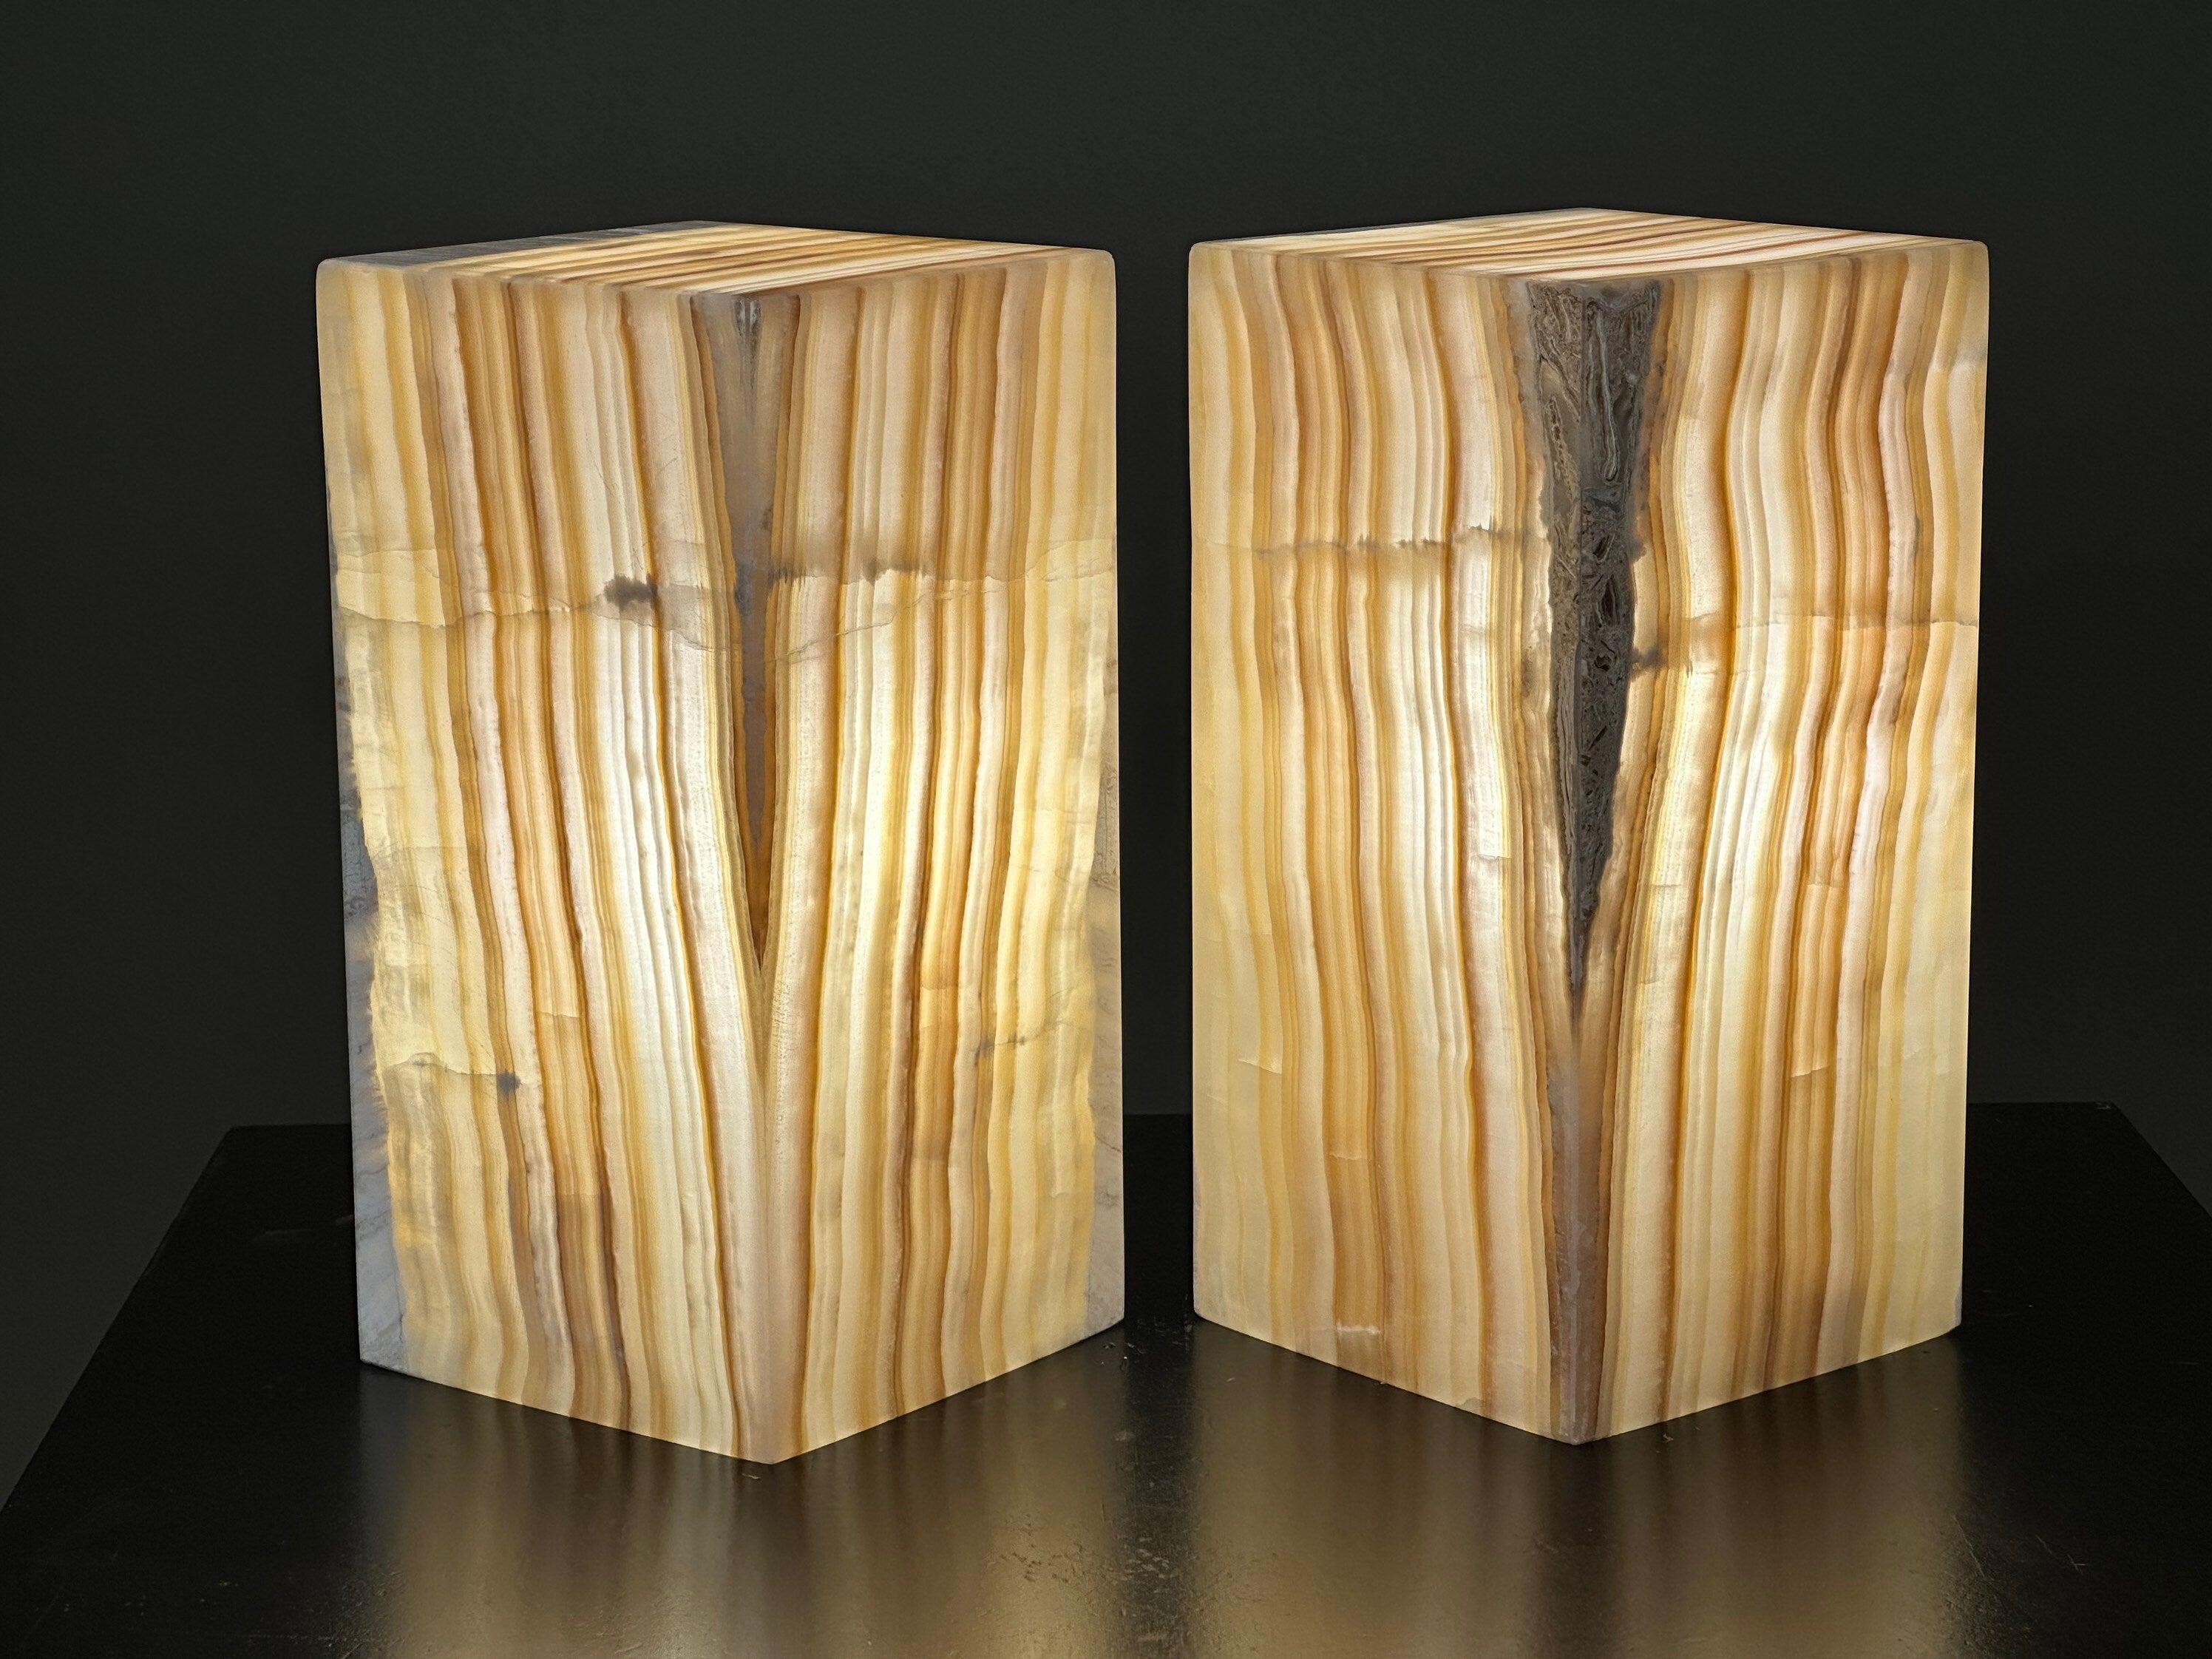 Vertical Banded Beige Striped Onyx Lamp | Onyx Lamp Set | Stone Lamp | Alabaster Lamp | Home Decor